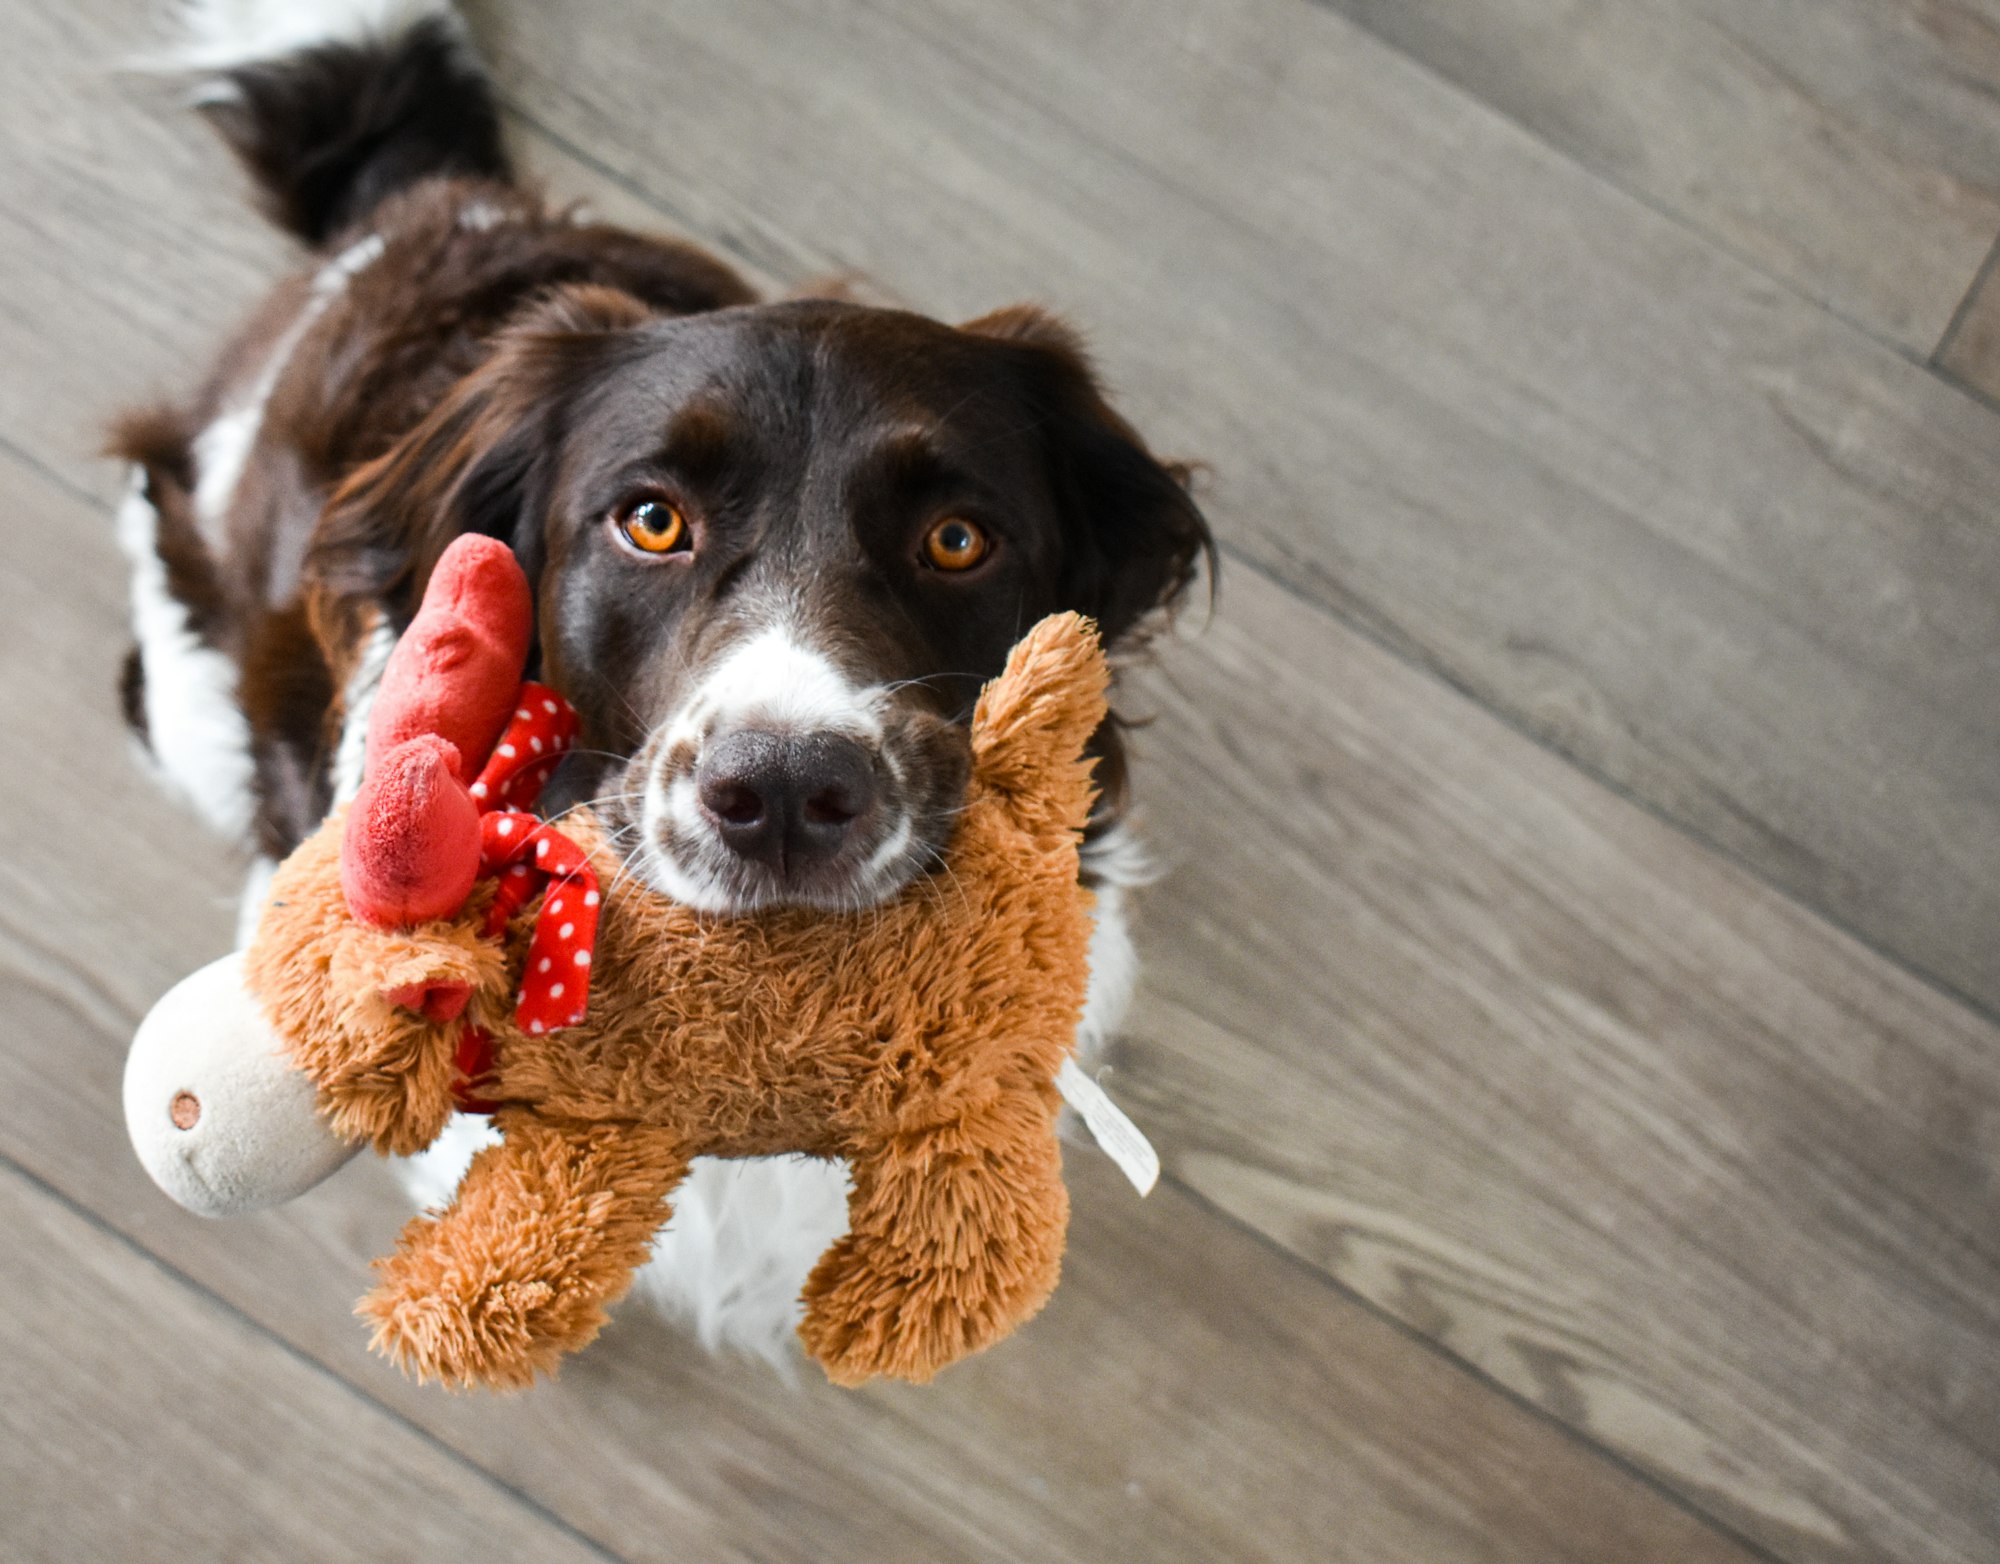 Ever Wonder Why Dogs Shake Their Toys?